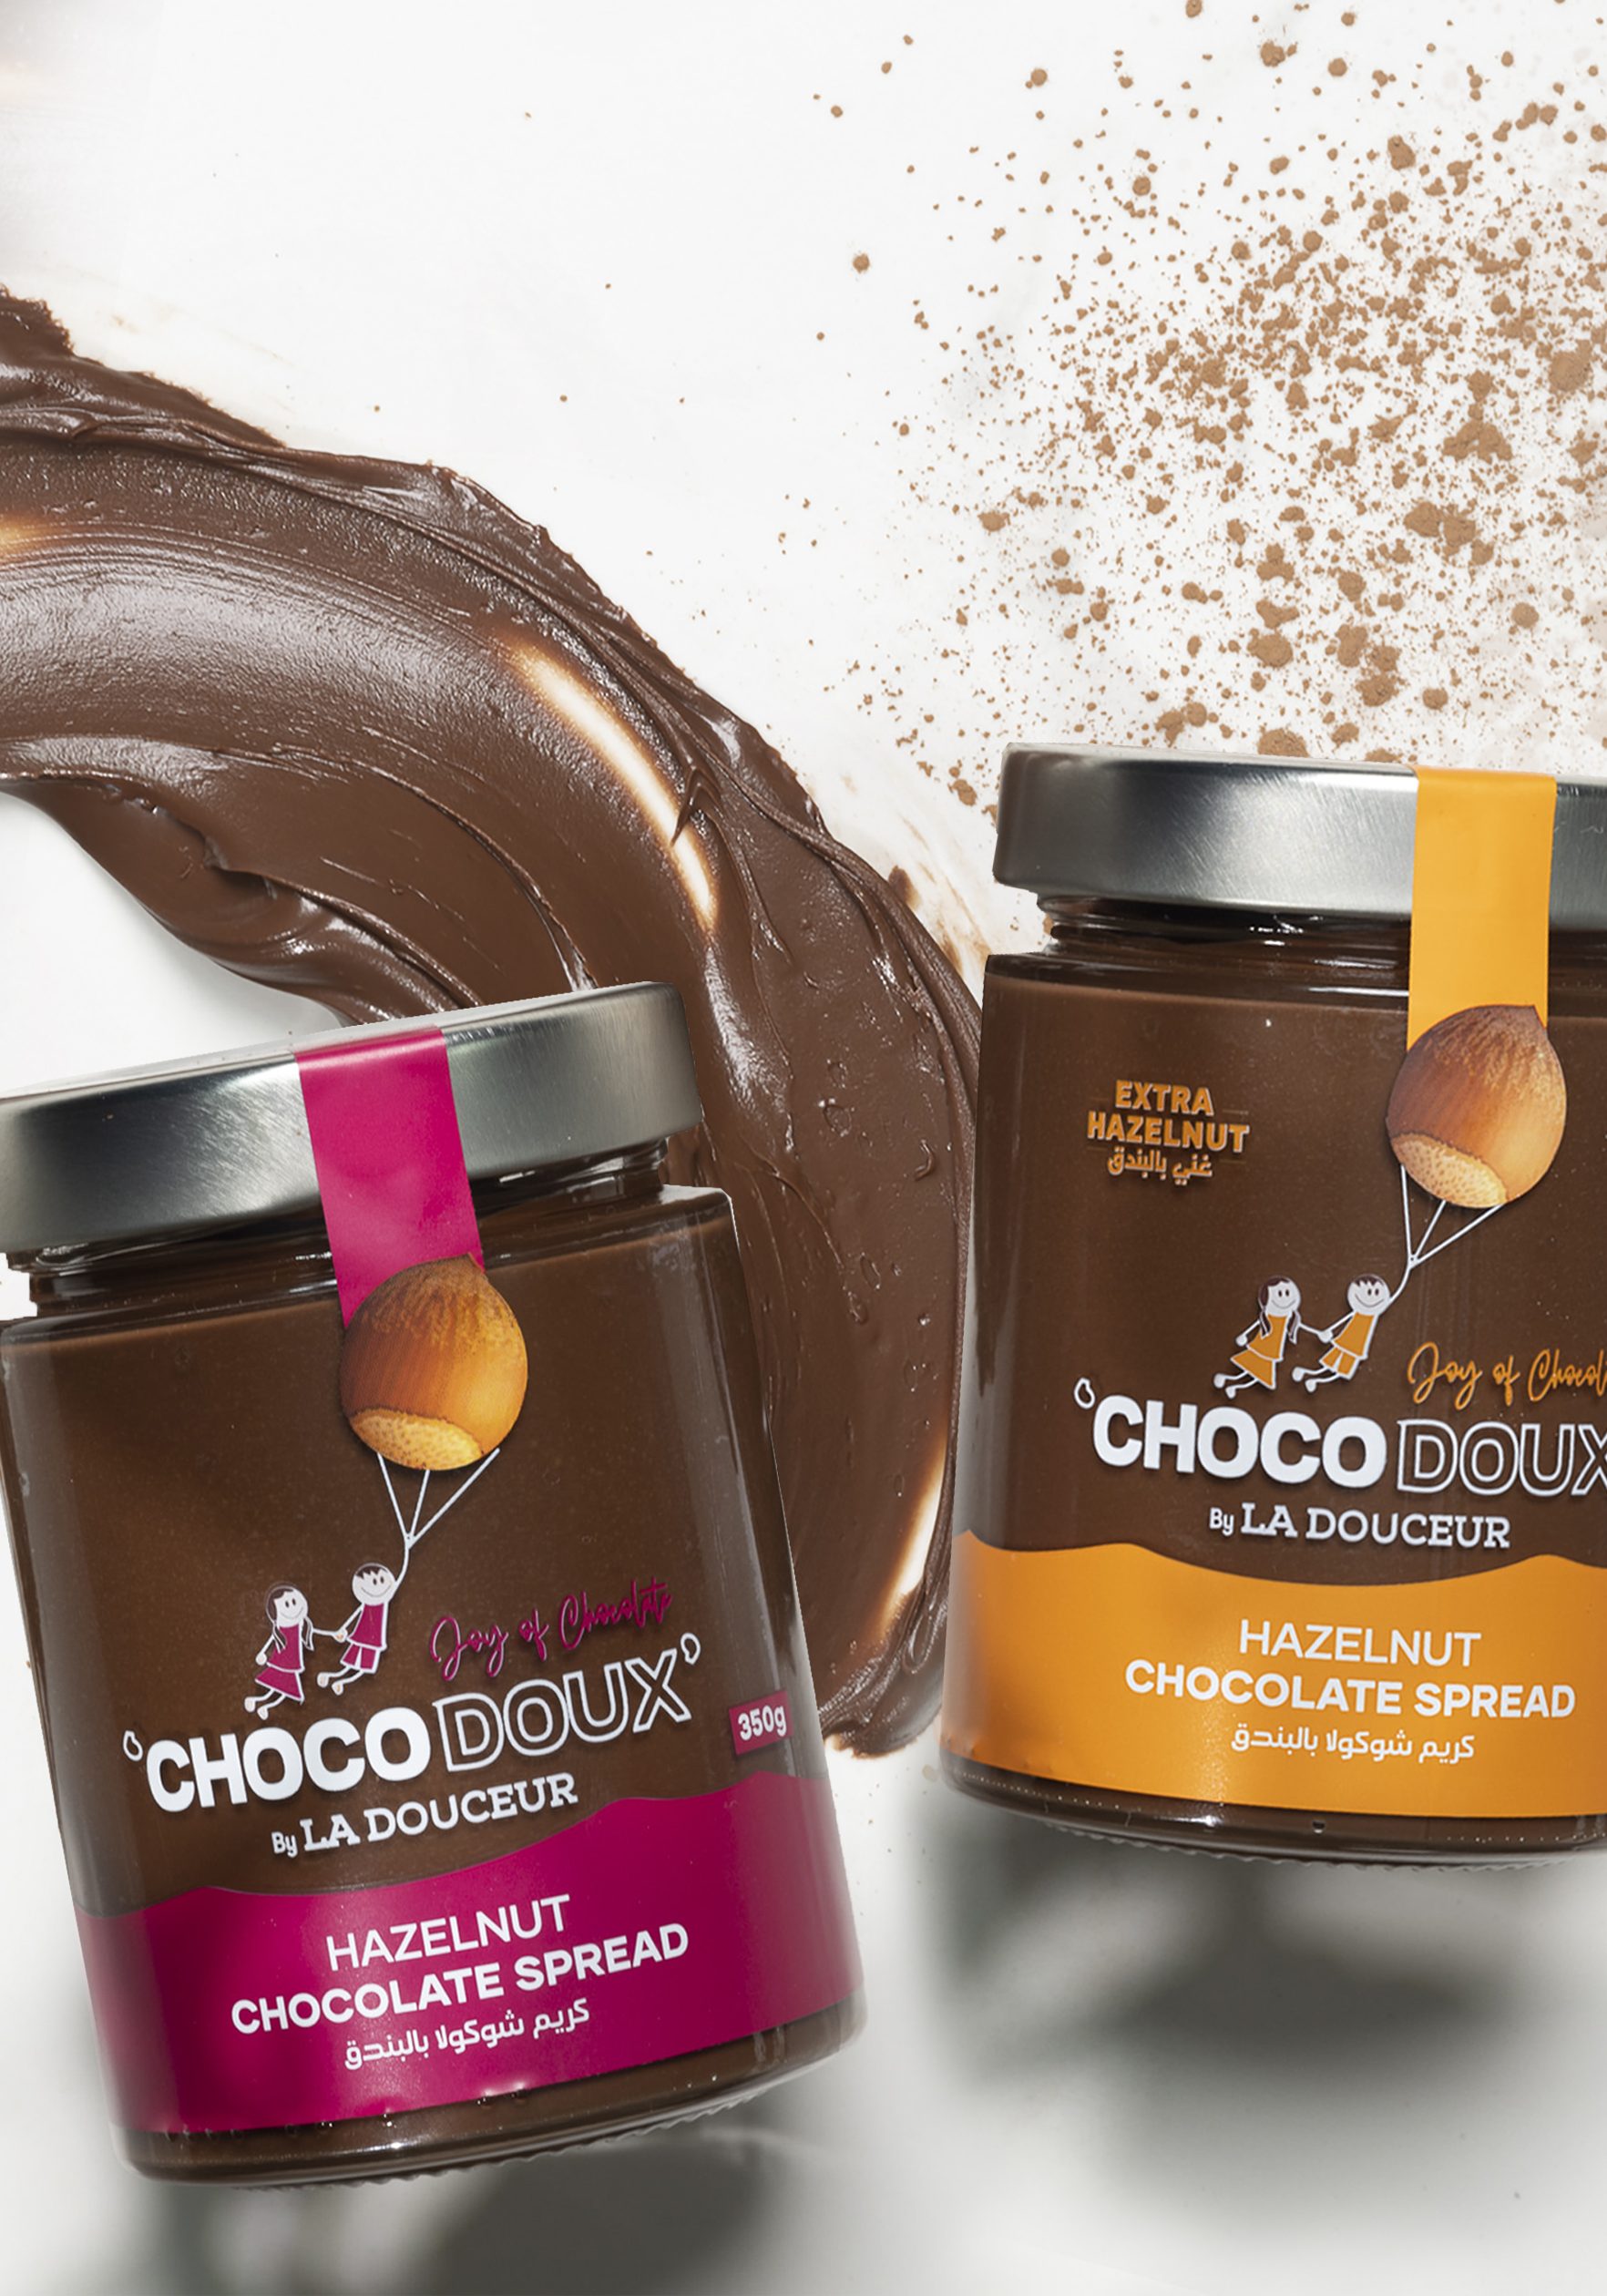 Discover Chocodoux products